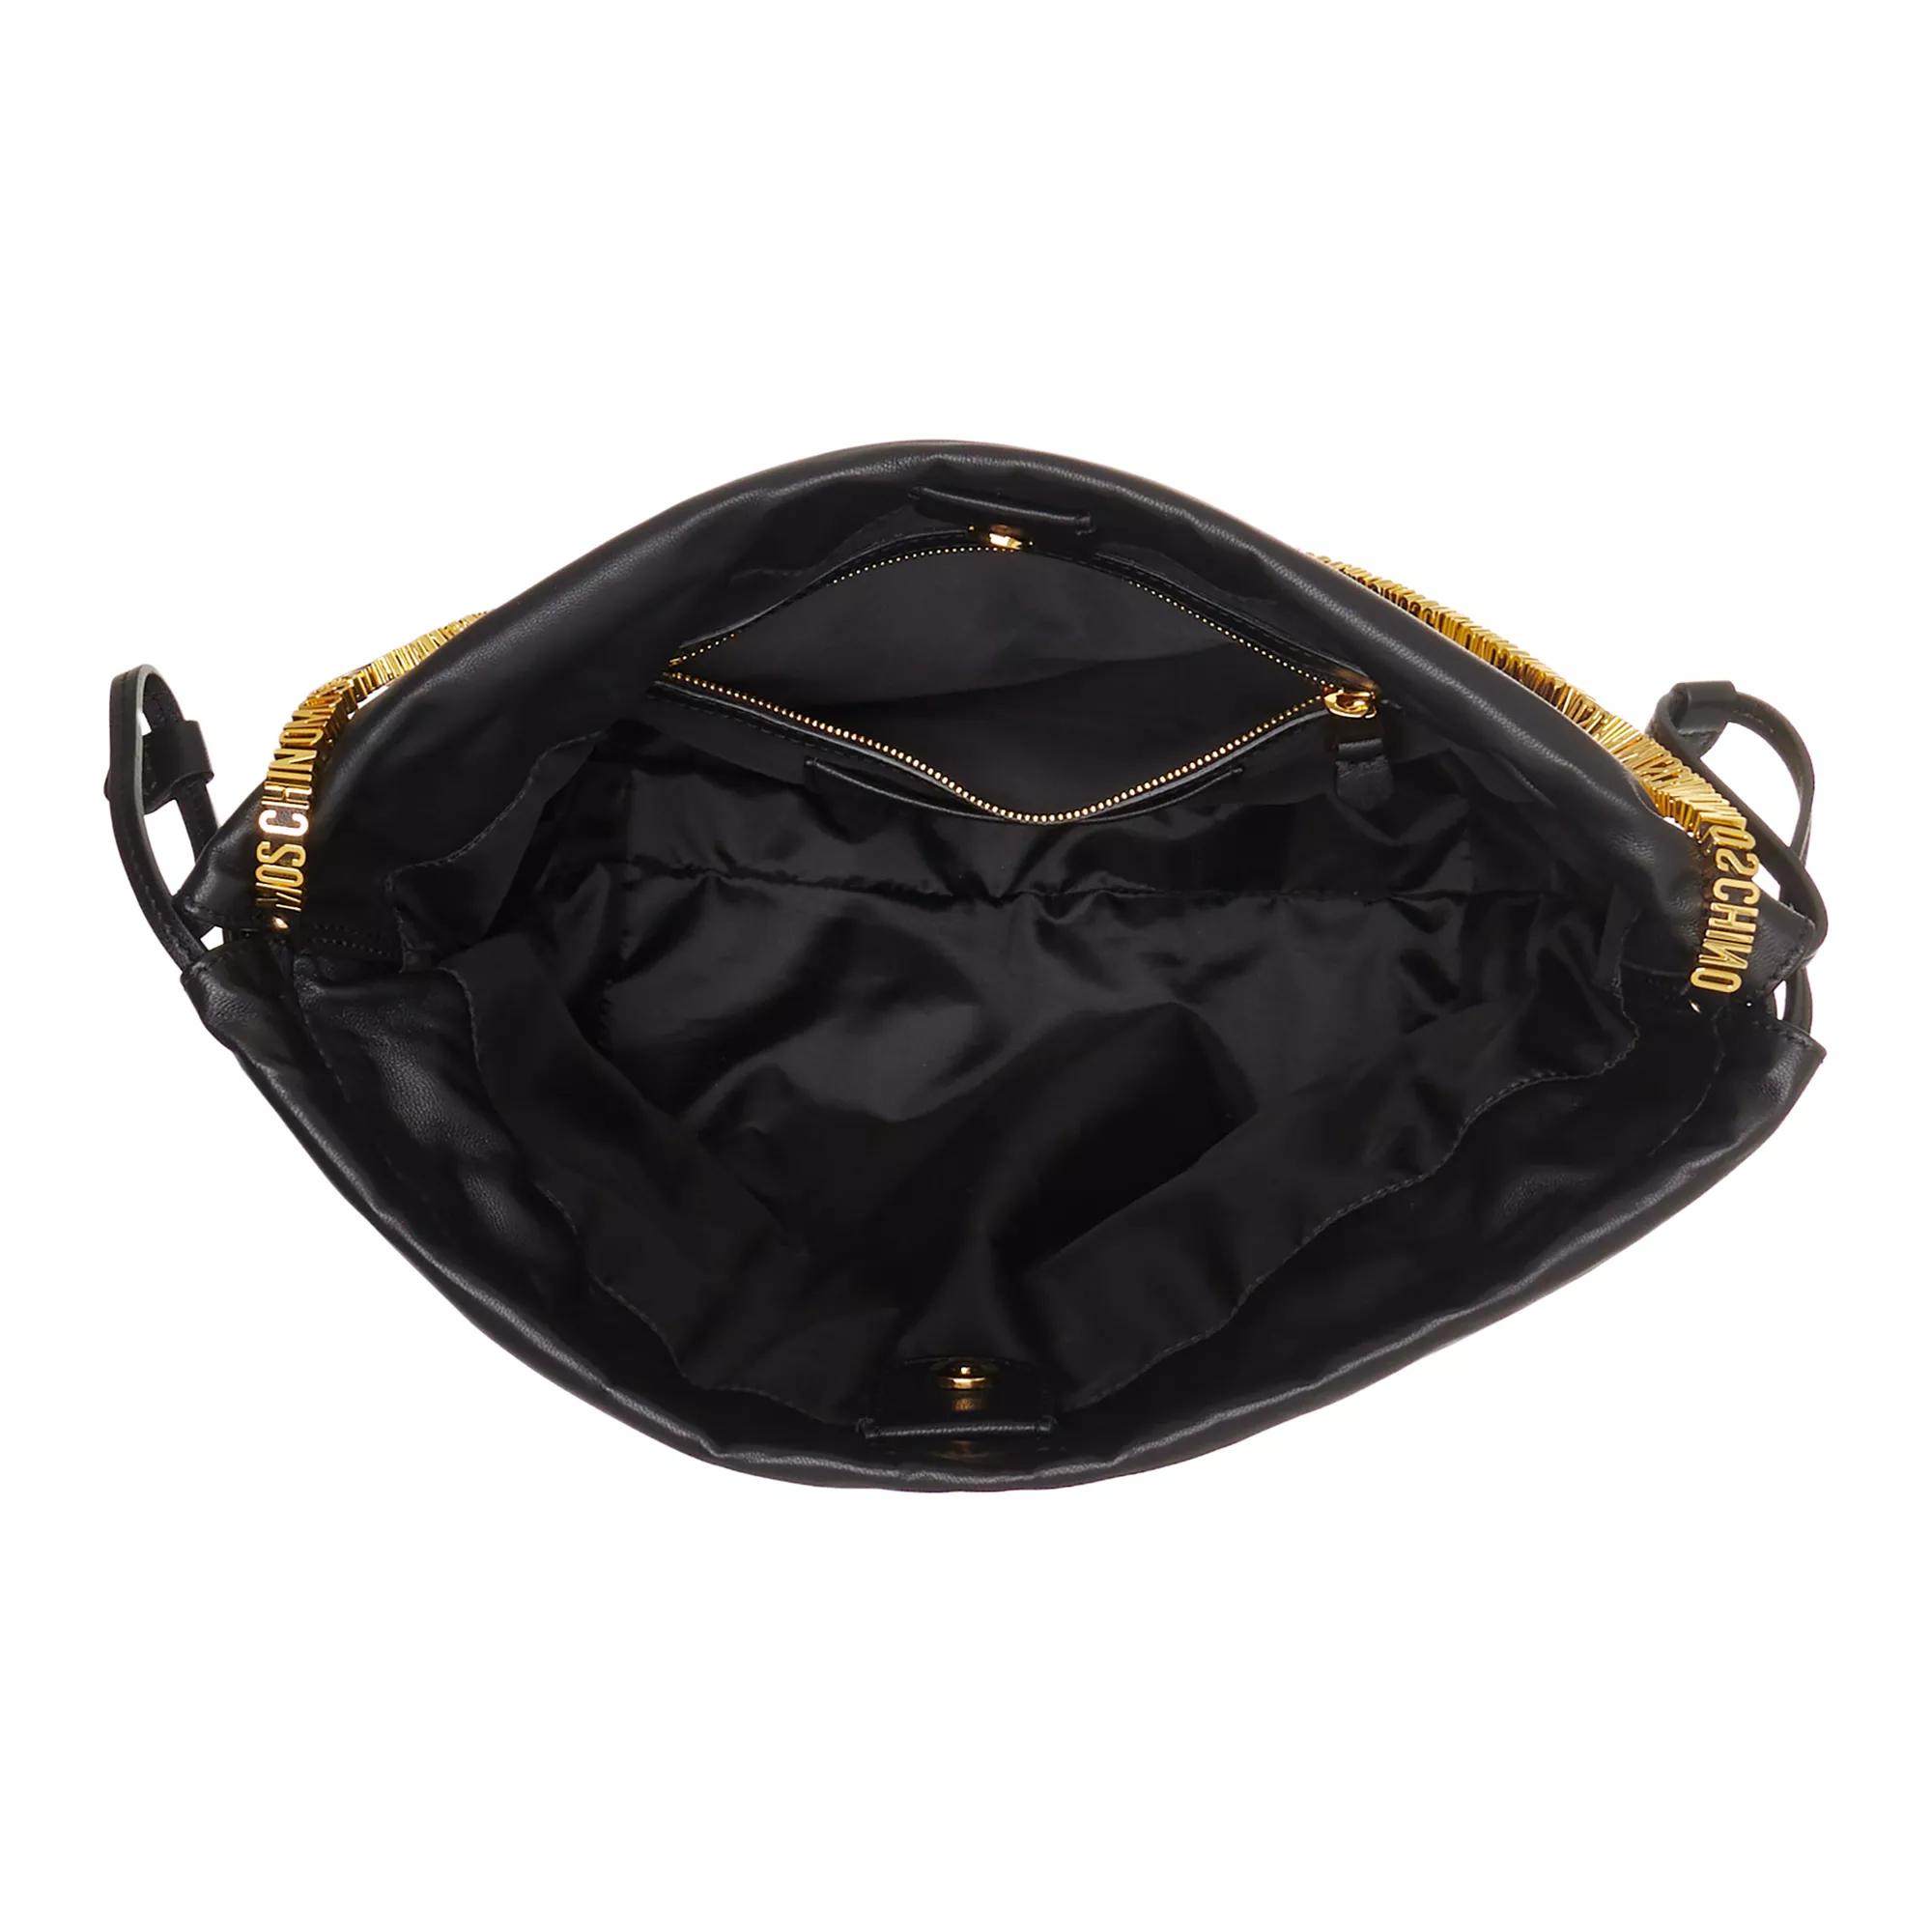 Moschino Shoppers Shoulder Bag in goud